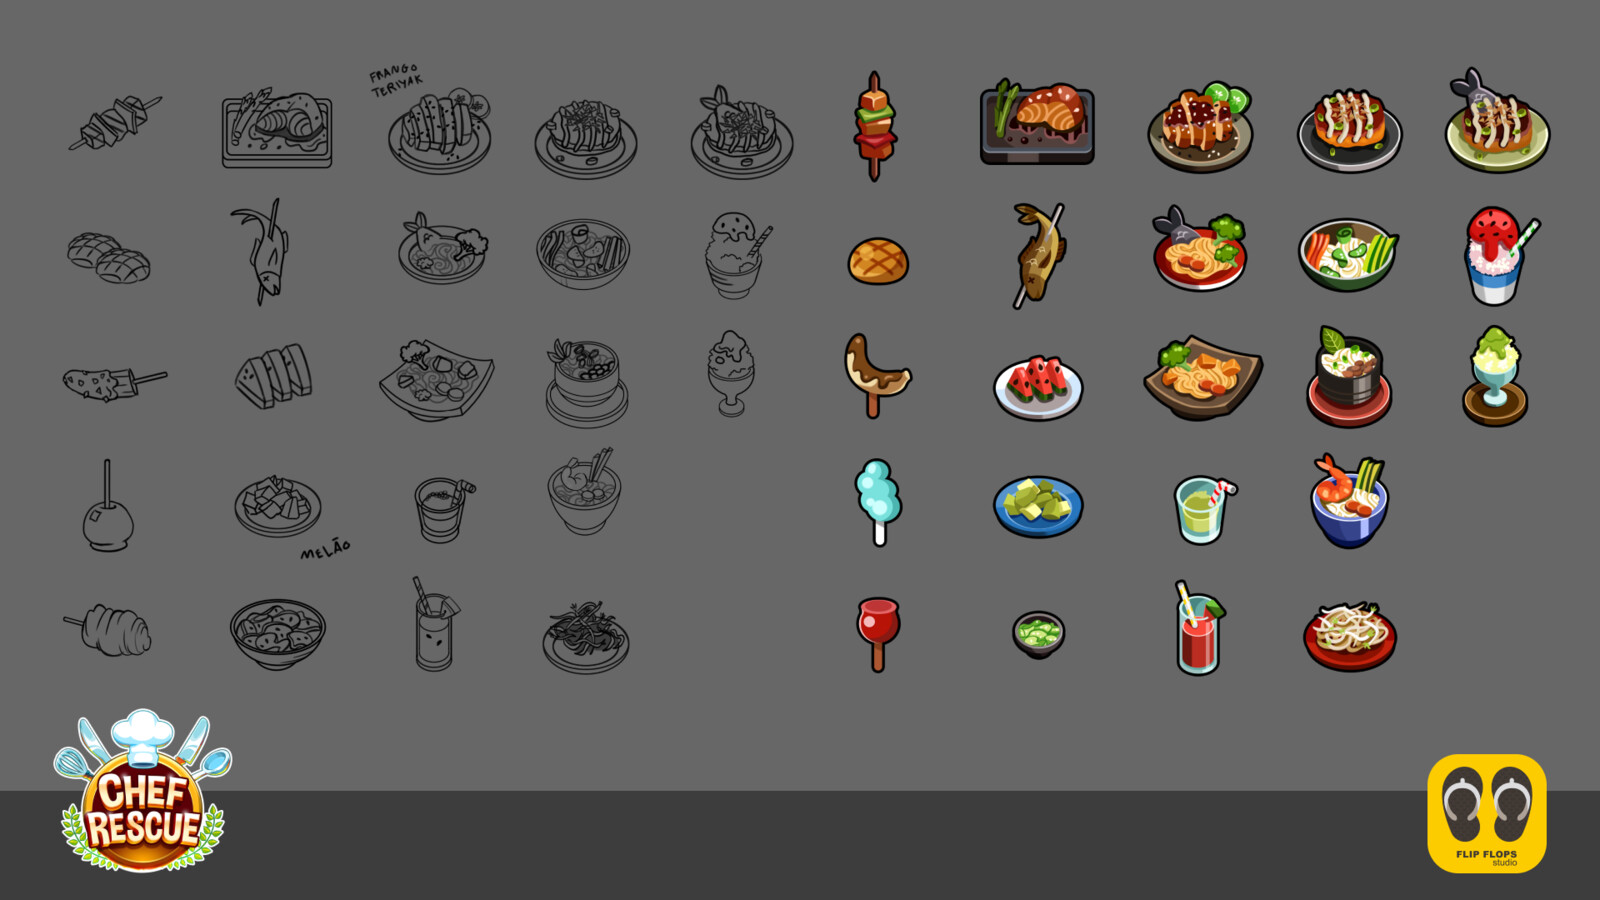 Study and final art of recipes